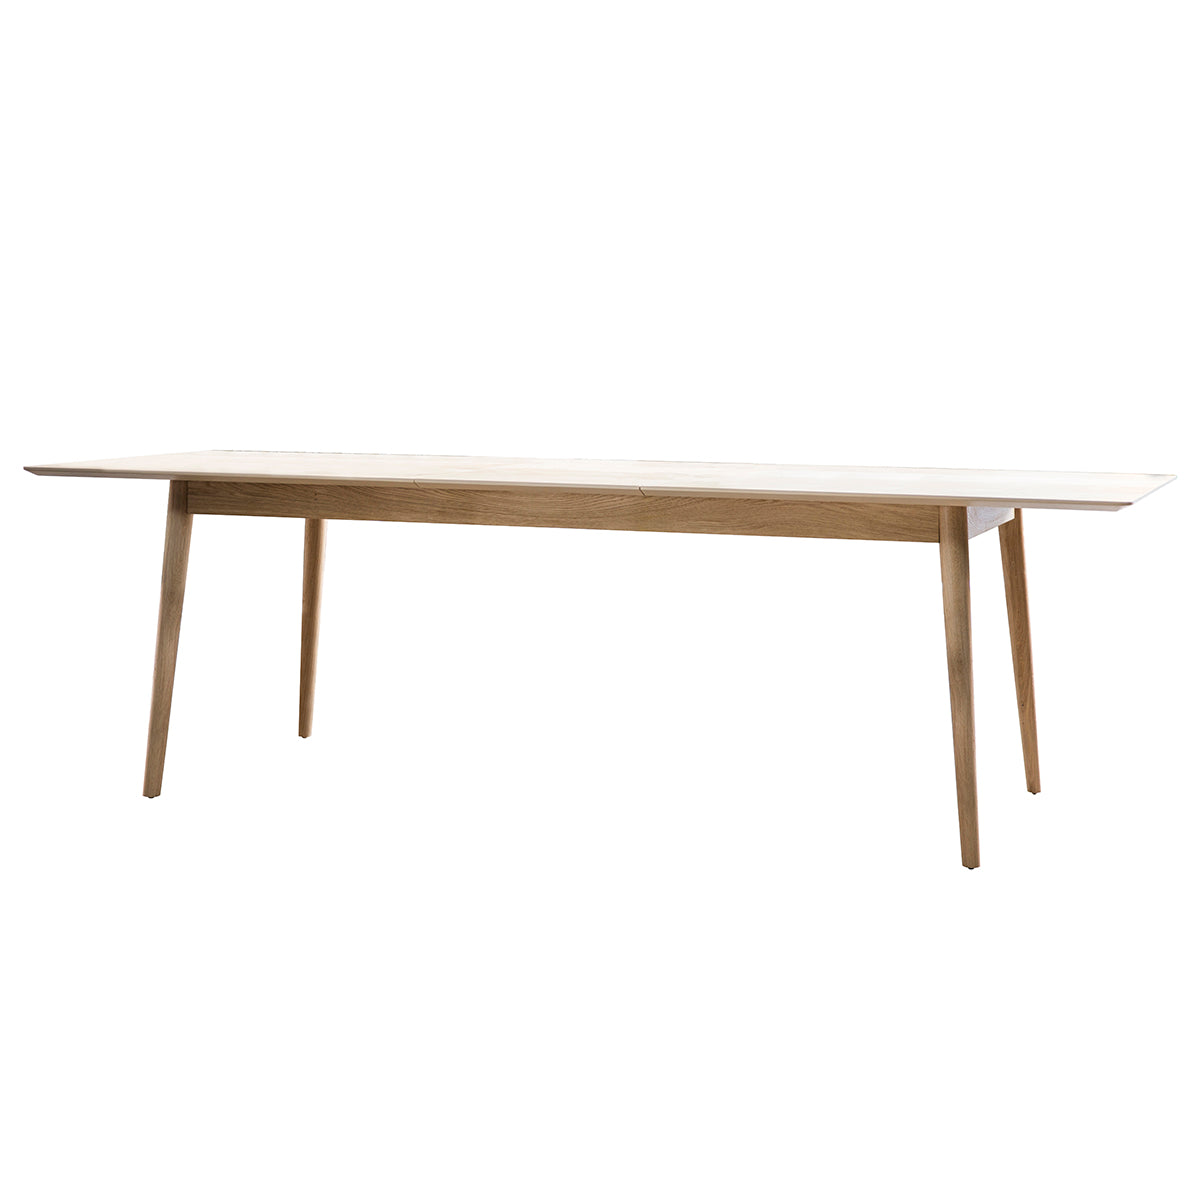 A Tristford Extendable Dining Table 2000/2520x900x760mm with a long wooden leg from Kikiathome.co.uk, perfect for interior decor.